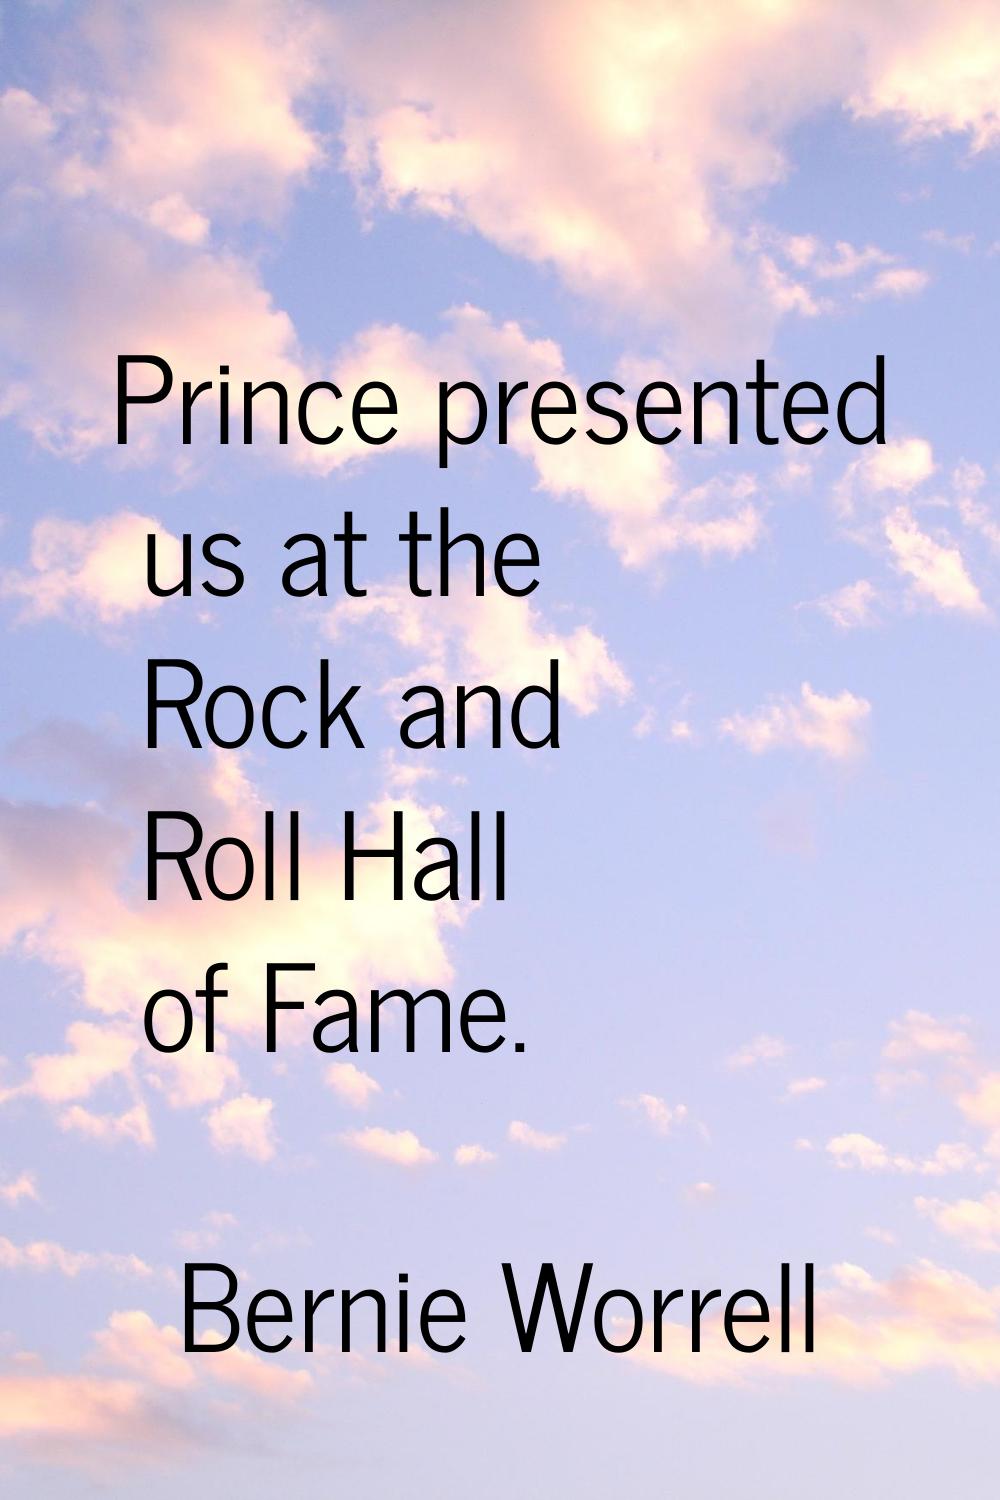 Prince presented us at the Rock and Roll Hall of Fame.